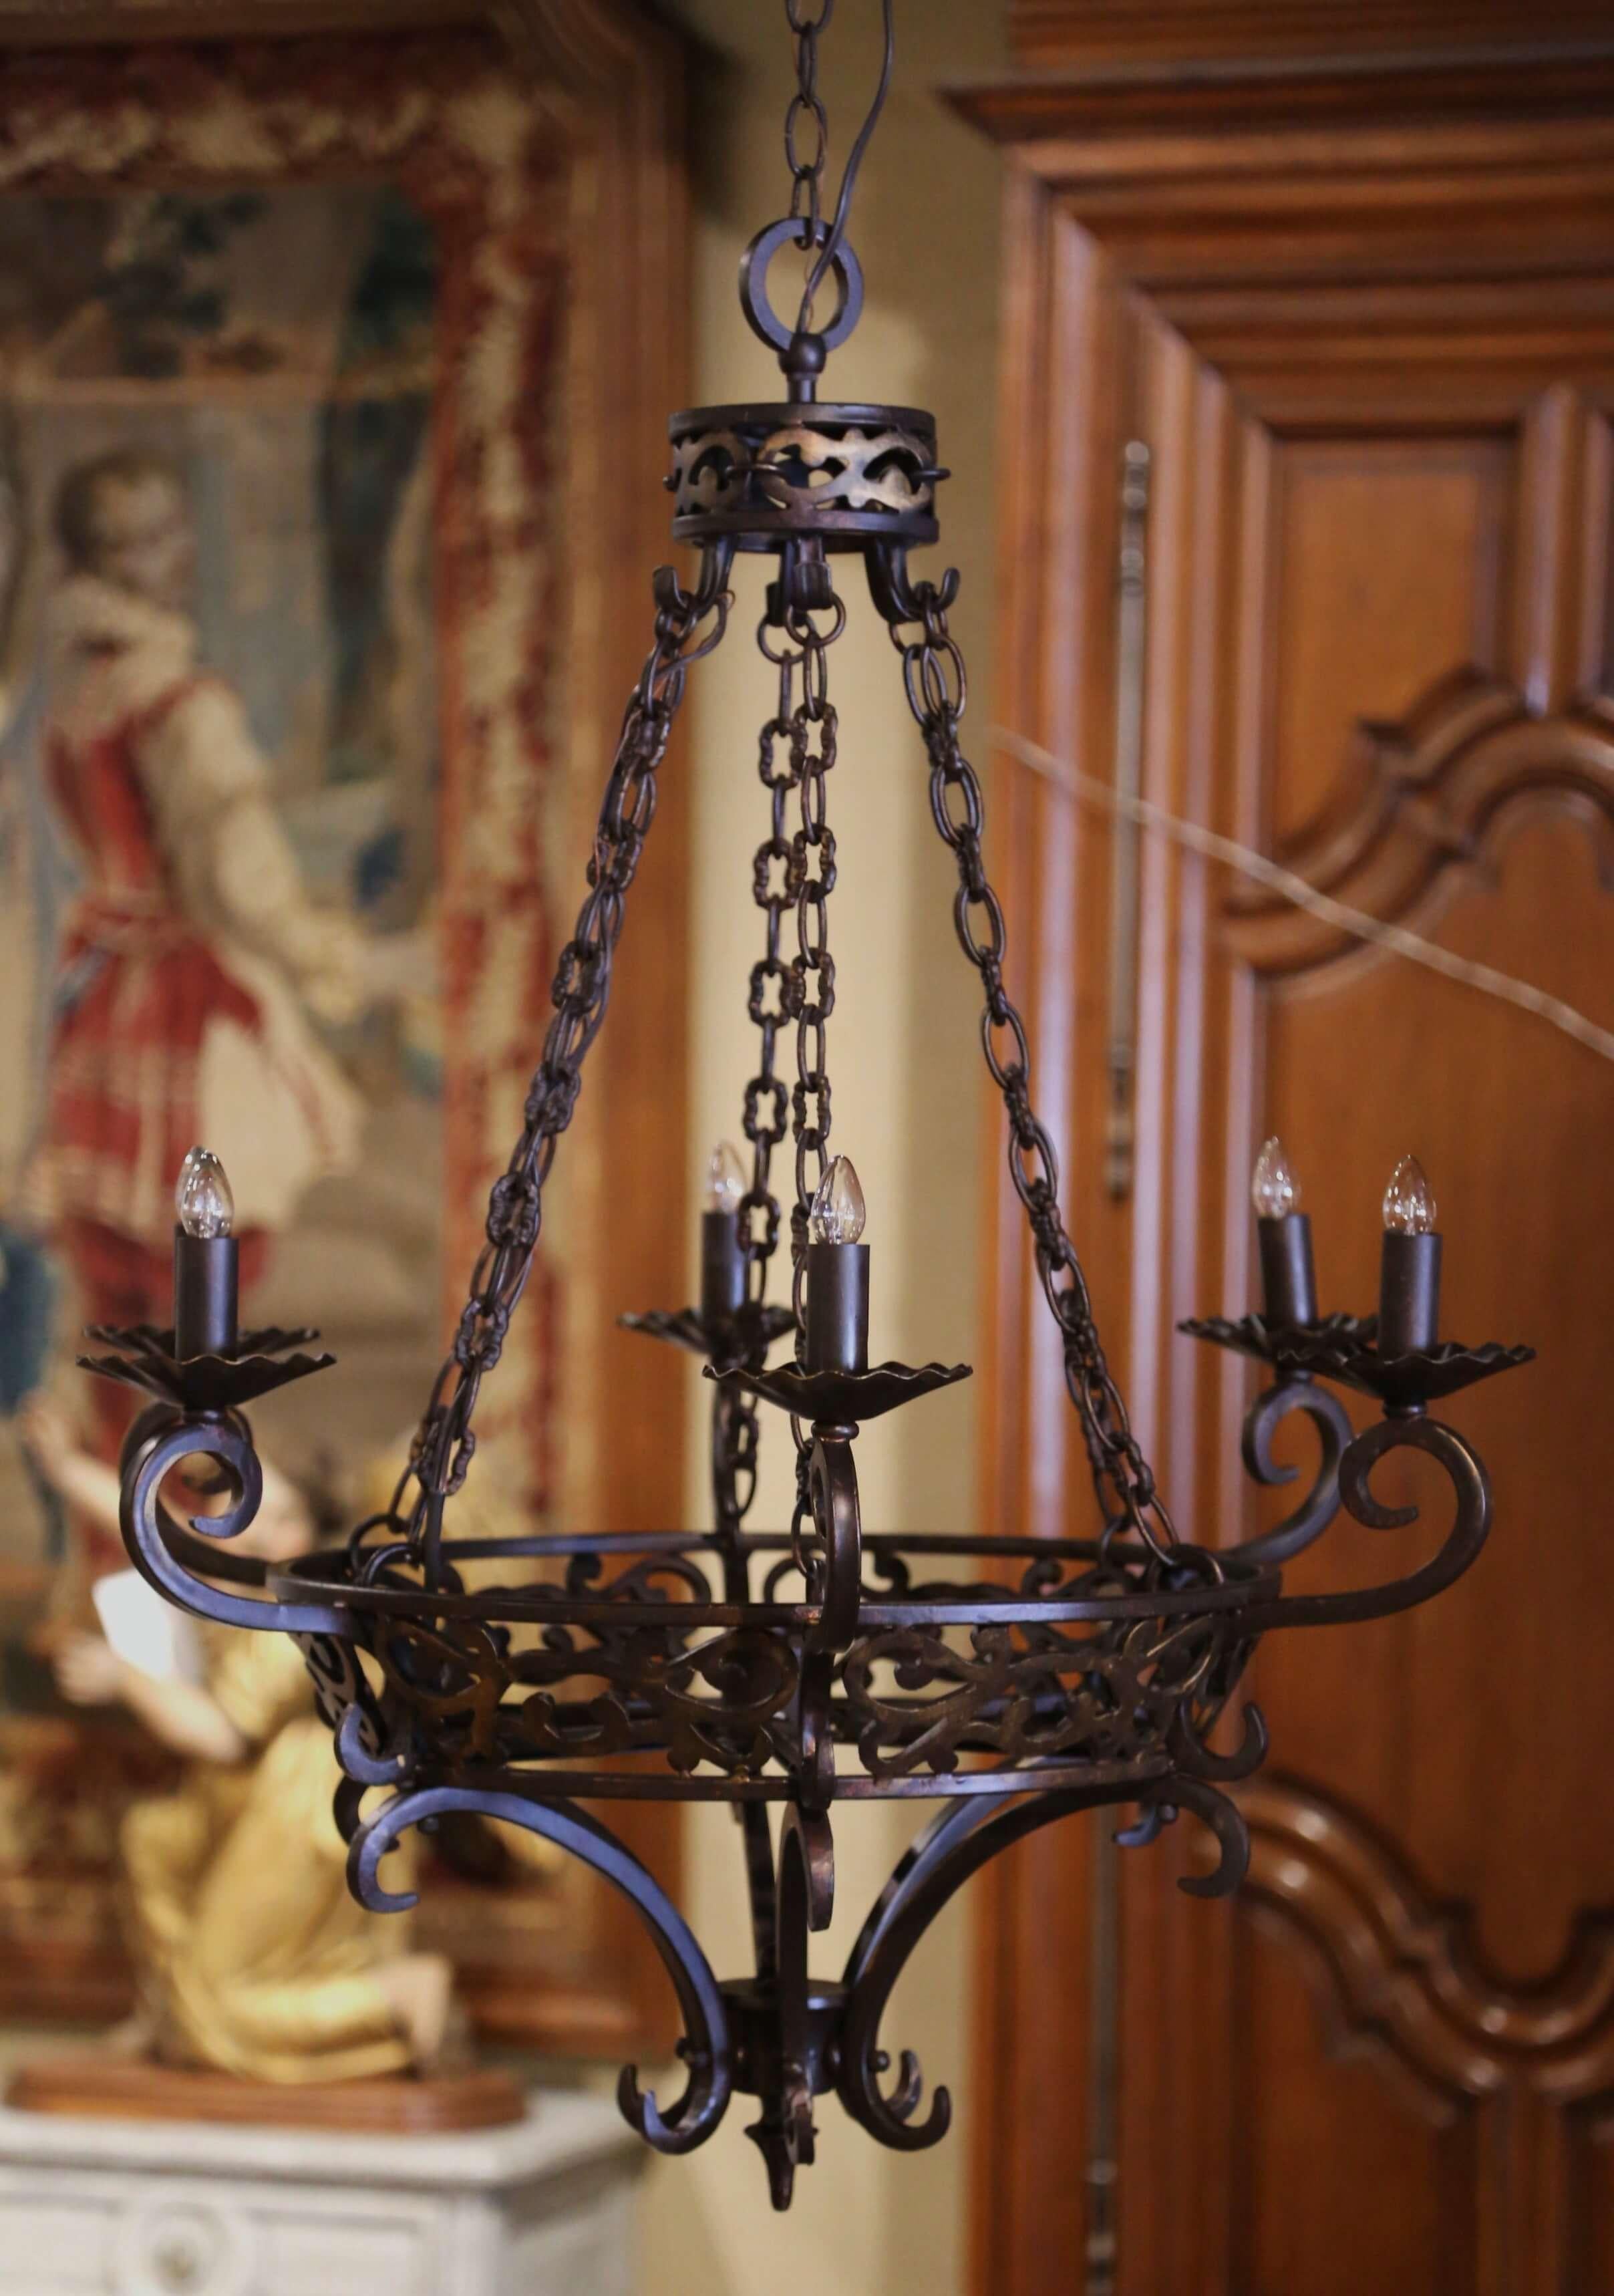 This intricate antique iron light fixture was forged in France circa 1960. Round in shape, the Gothic chandelier features scrolled decor under the large circle. The fixture is secured with four chains connected to a decorative canape at the top. The